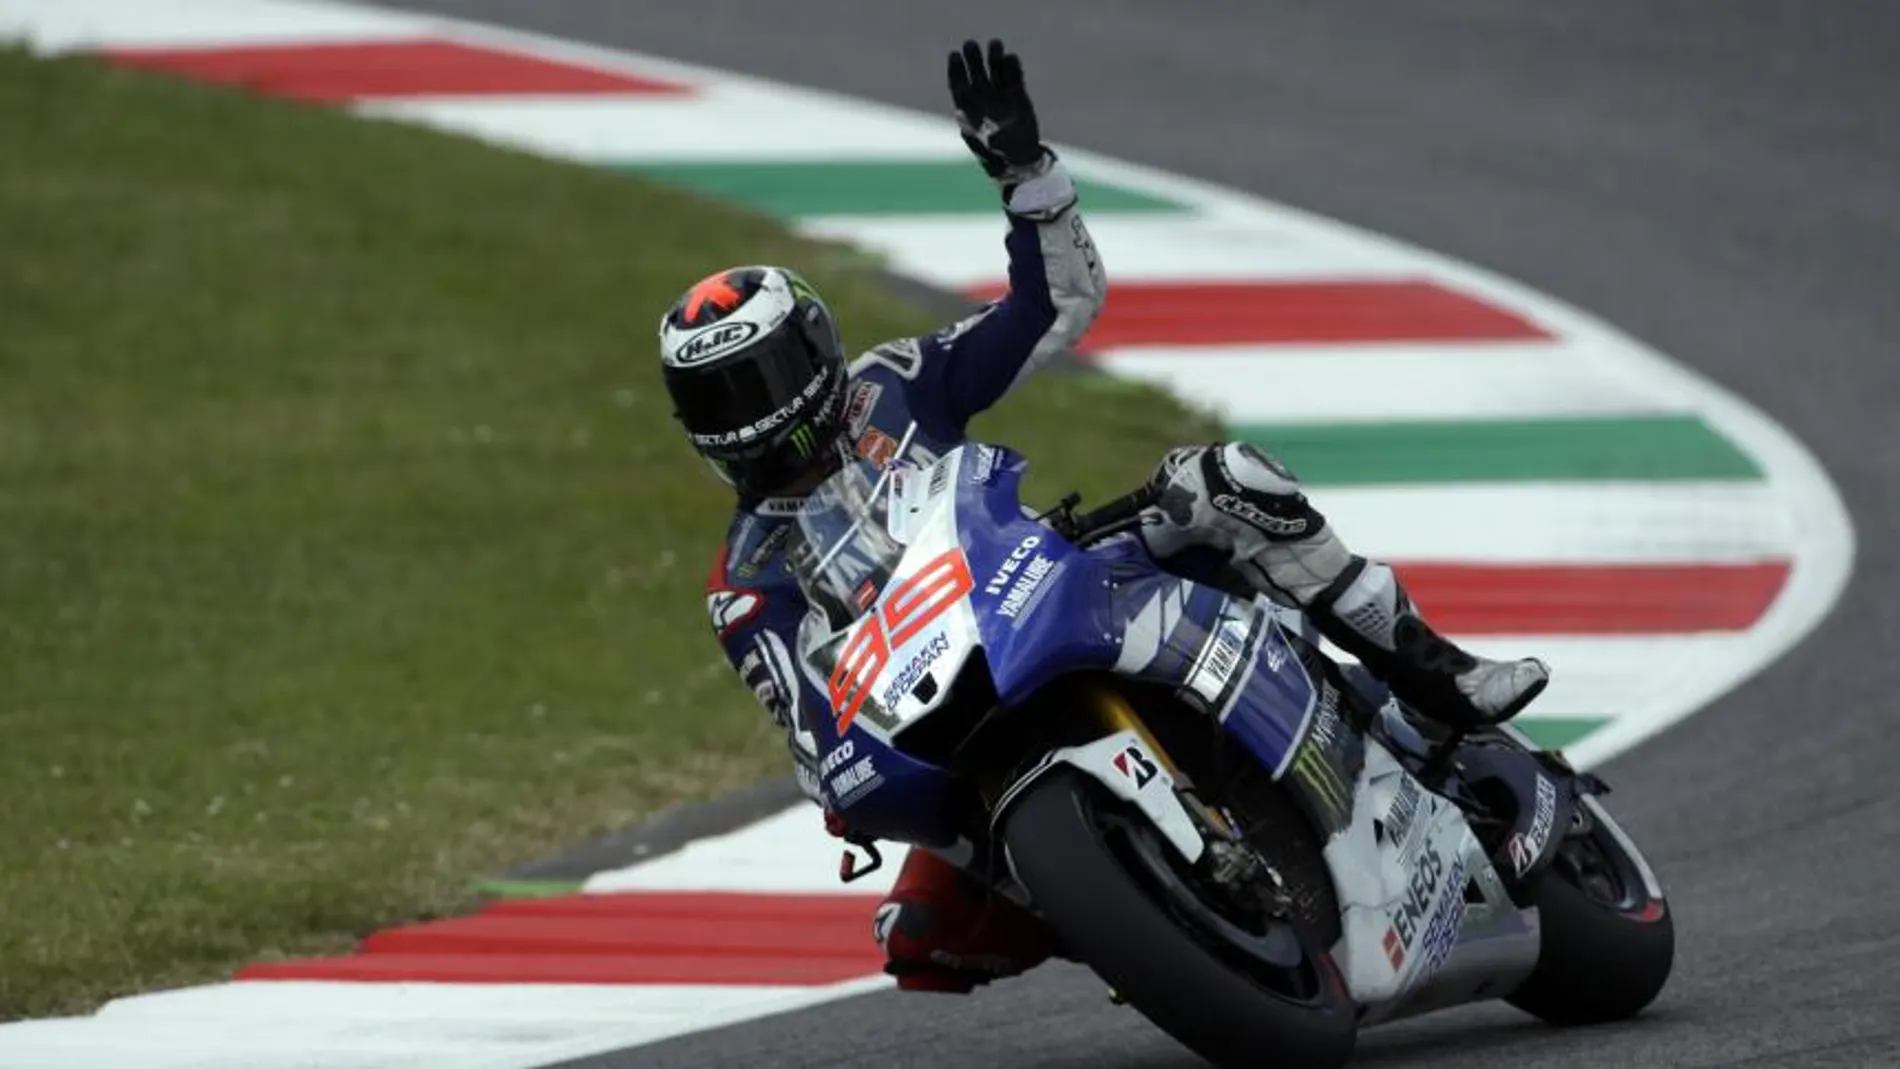 Spain's Jorge Lorenzo waves to fans at the end of the official practice for Sunday's Italian Moto GP, at the Mugello race circuit, in Scarperia, Italy, Saturday, June 1, 2013. (AP Photo/Gregorio Borgia)